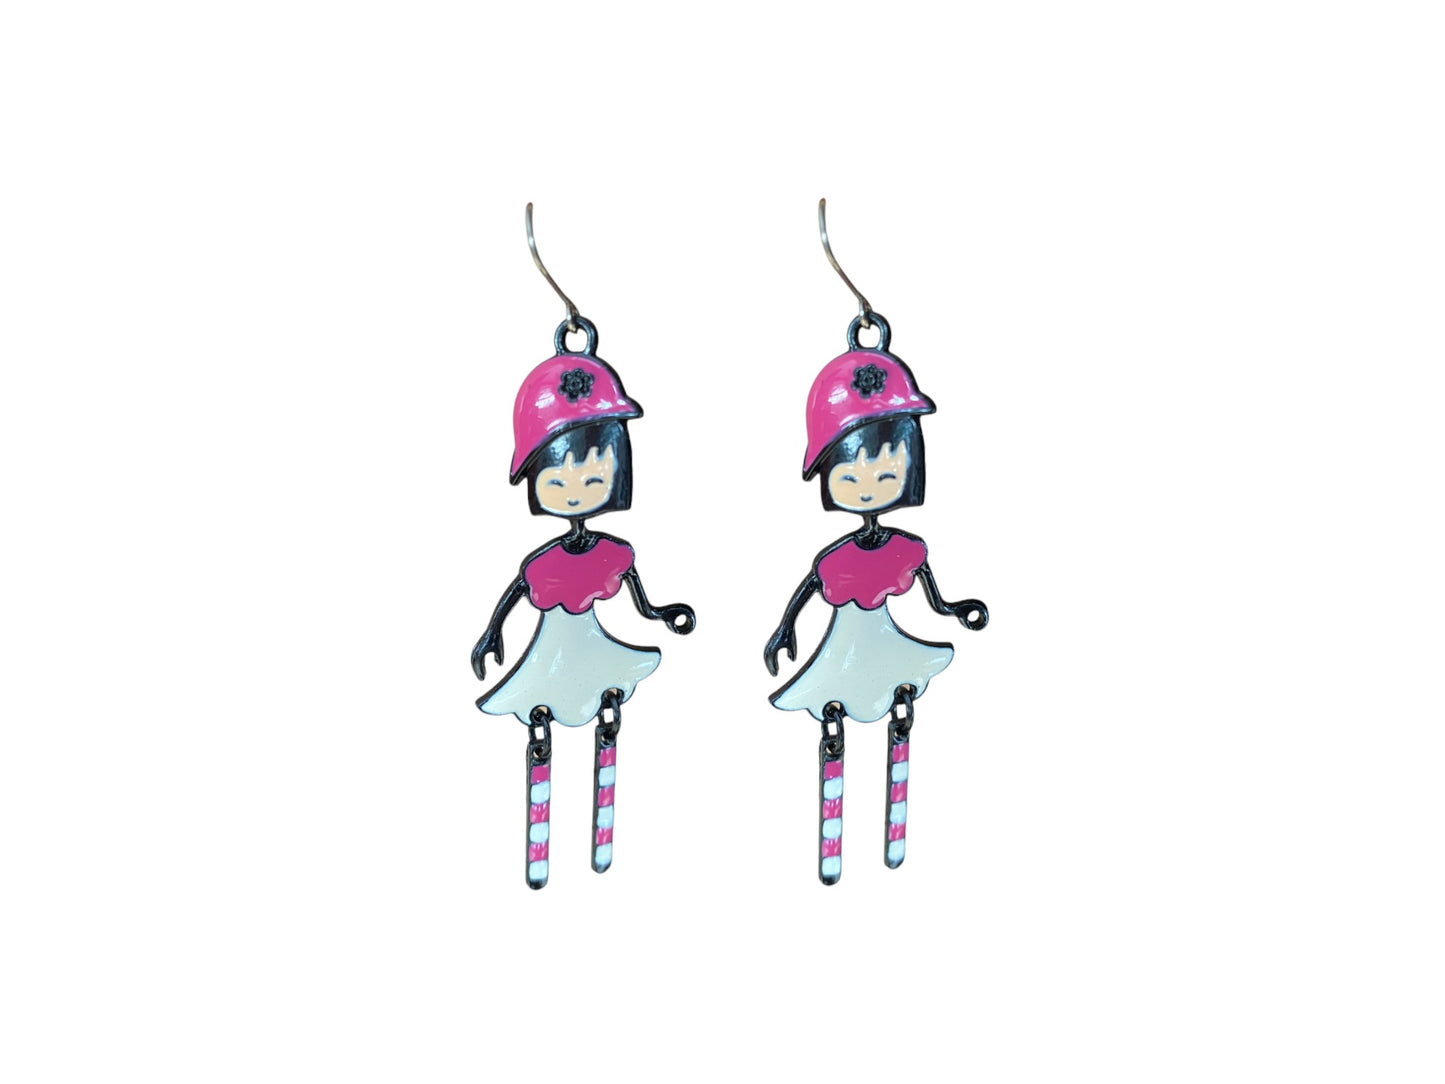 Harajuku Girl Charm Drop Earrings pink with a titanium hook on a white background